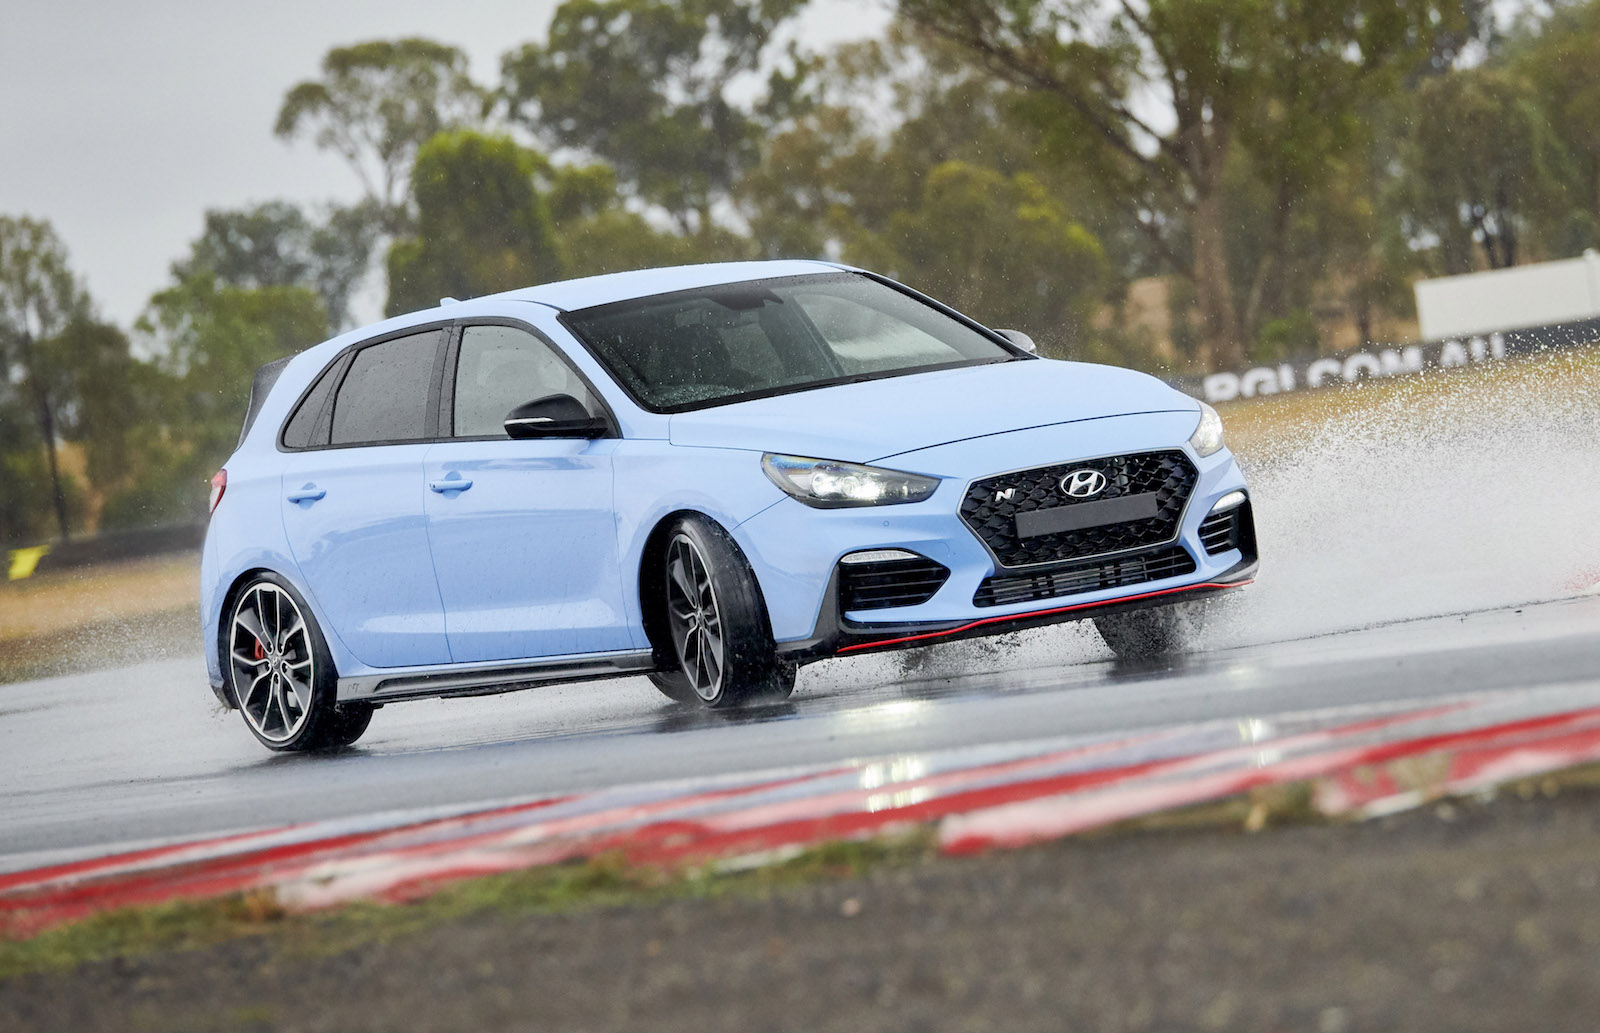 Hyundai i30 N getting track-ready accessories, 8spd DCT on the way